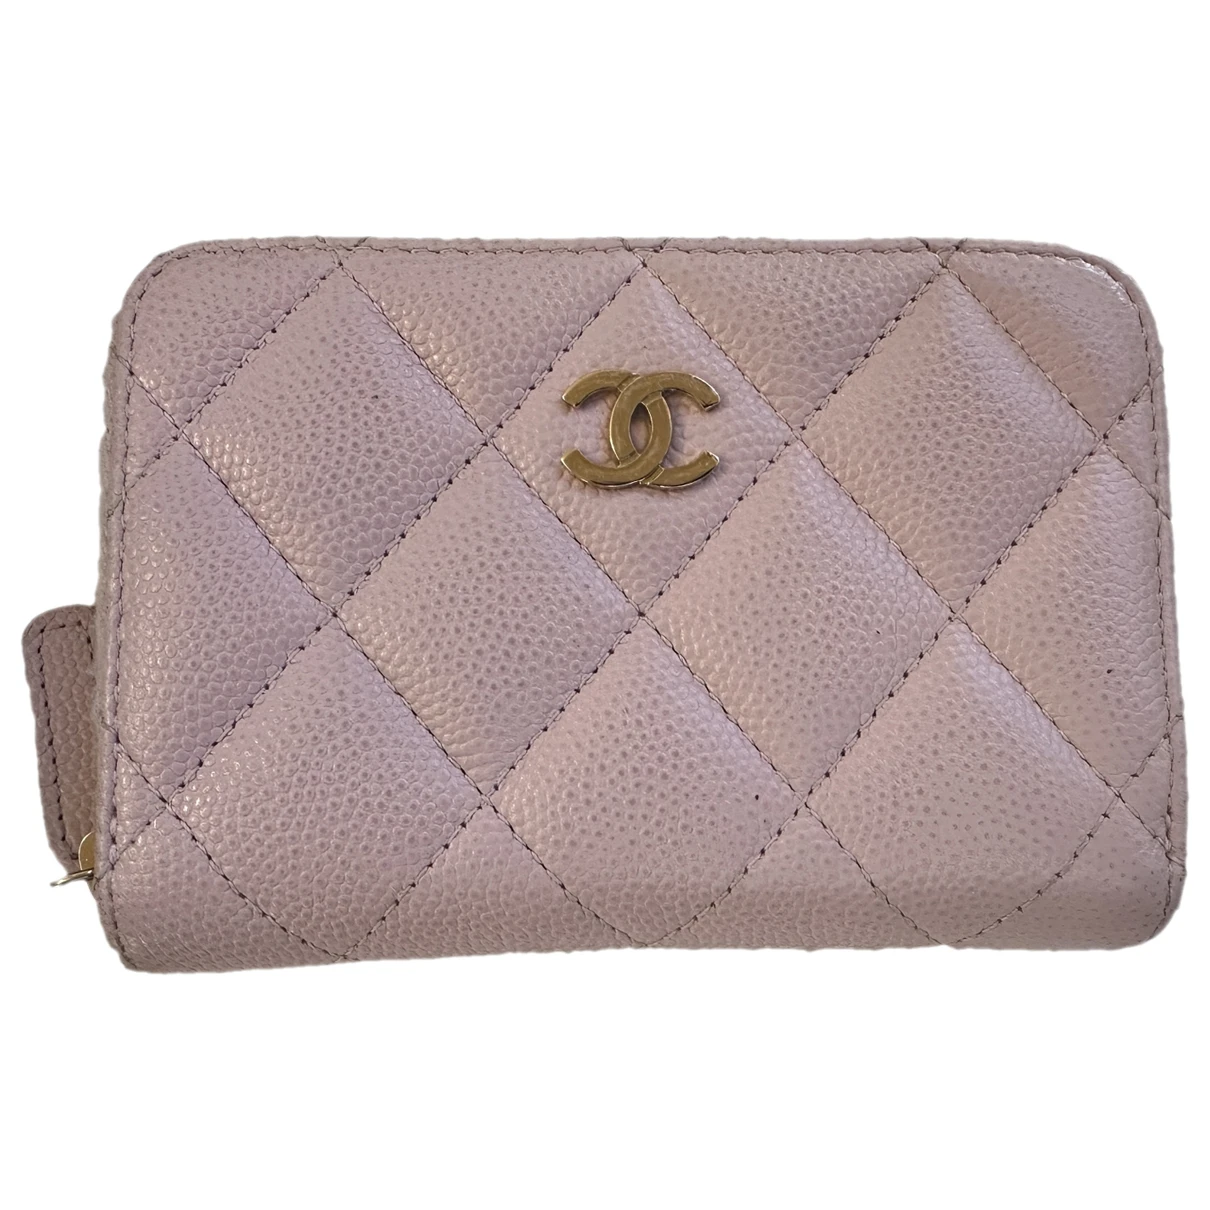 accessories Chanel wallets Timeless/Classique for Female Leather. Used condition